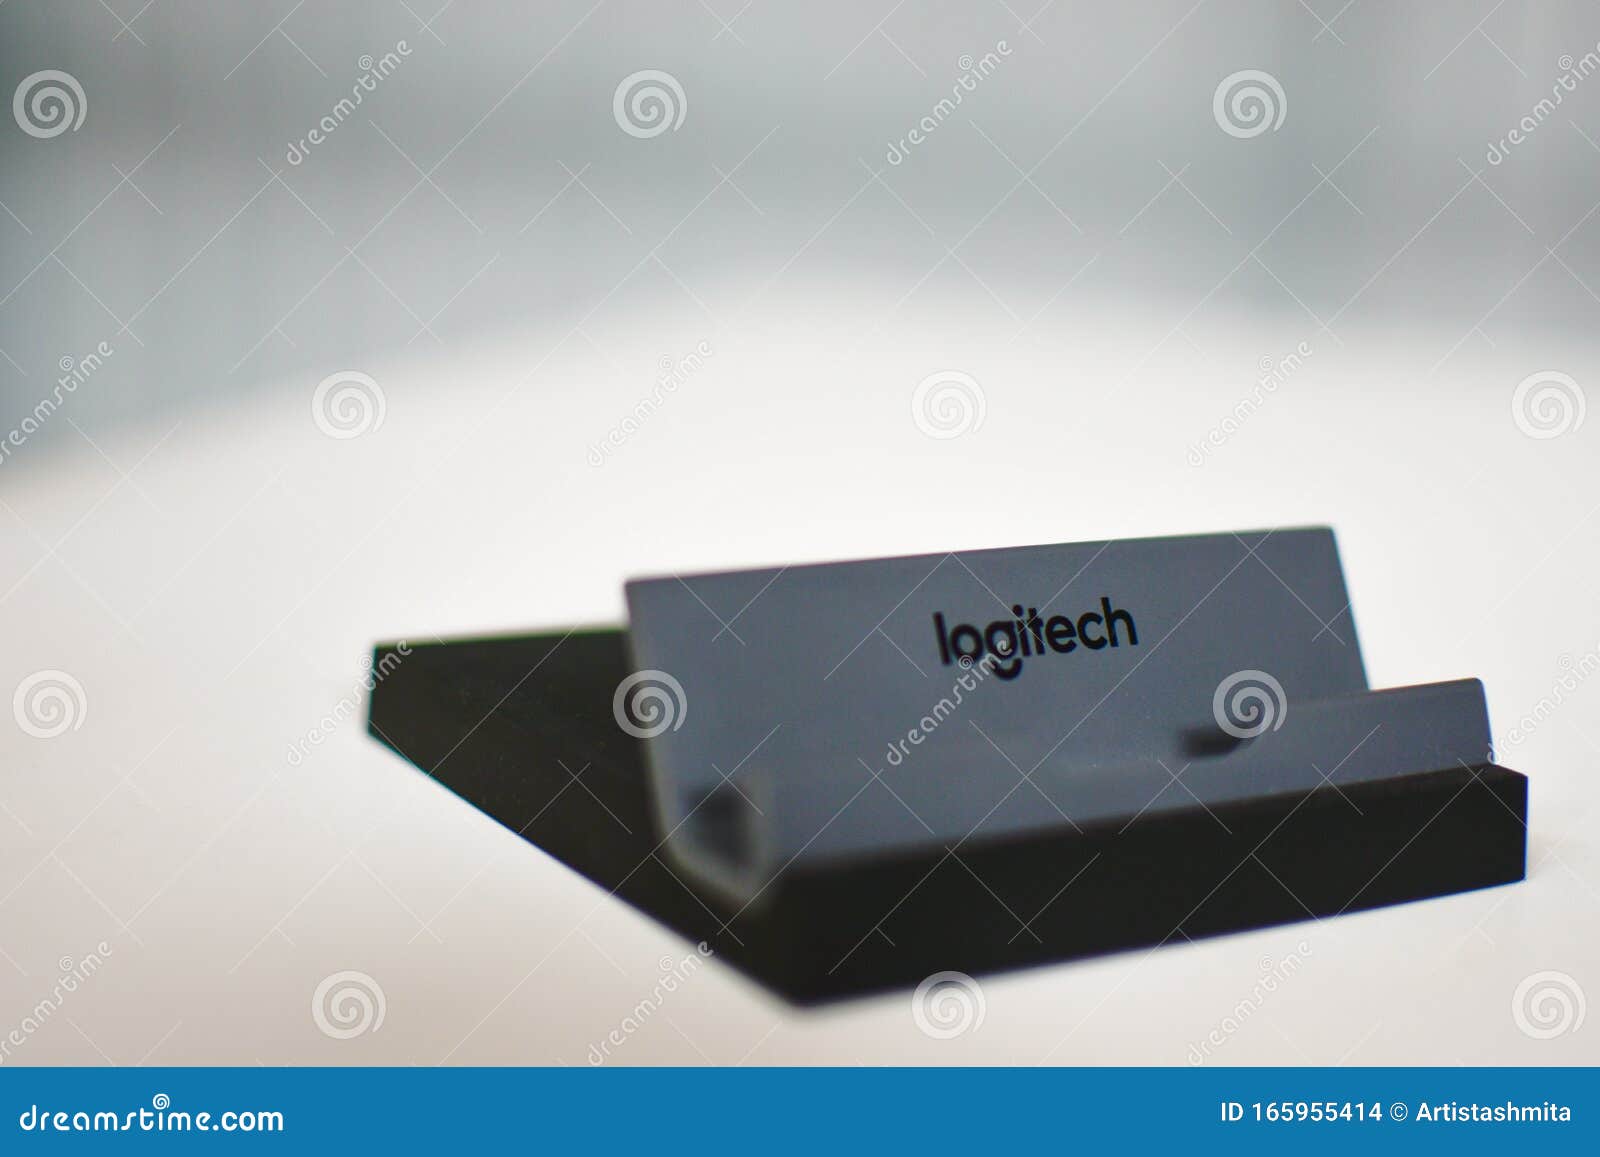 bladre impressionisme udgør Logitech Accessory, Multi Device Keyboard Phone Stand Editorial Stock Image  - Image of offices, asia: 165955414